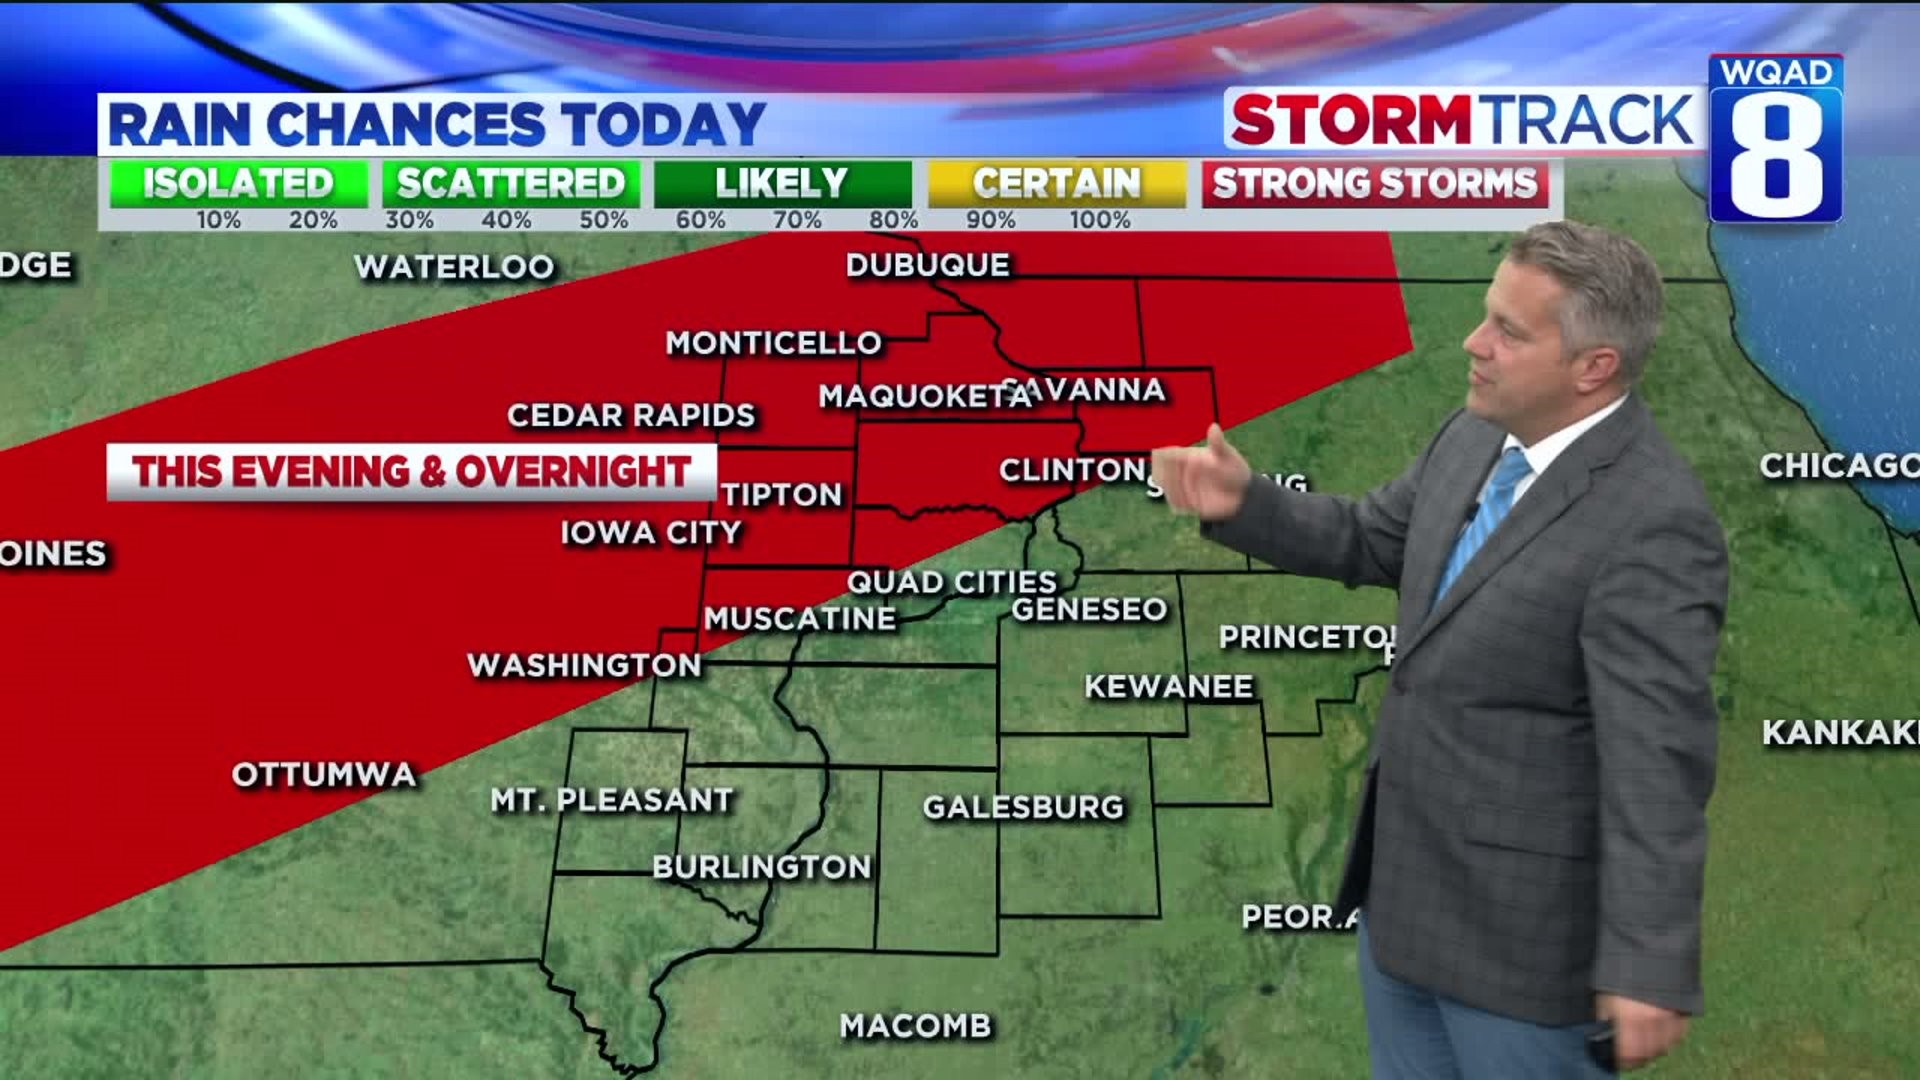 Eric says heavy rain and isolated severe weather are possible tonight